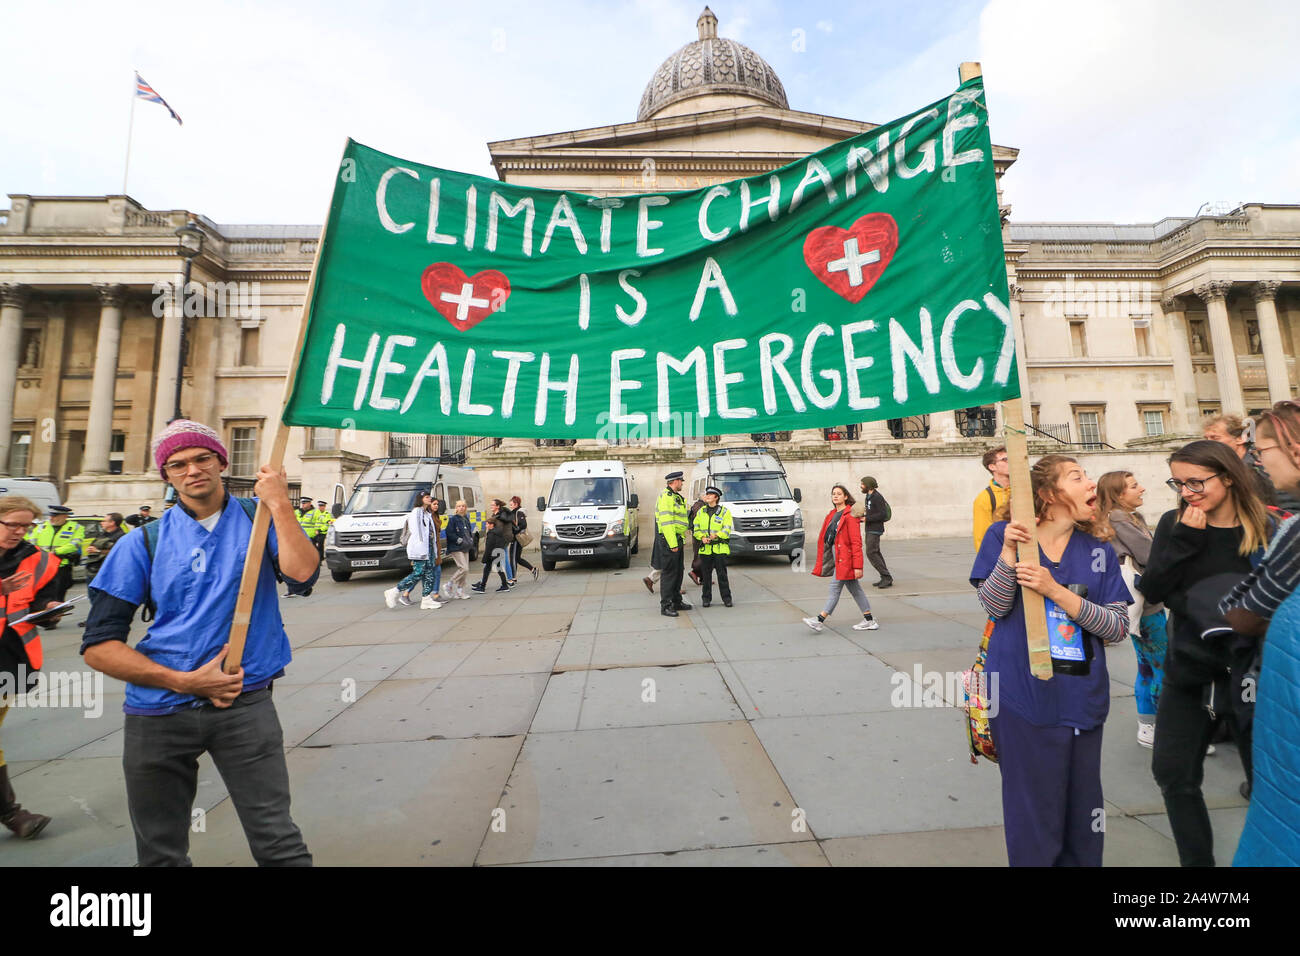 London, UK. 16th Oct, 2019. Climate activists from Extinction rebellion stage a protest vigil in Trafalgar Square to demonstrate against section 14 of the public order act 1986 imposed by the Police banning protests - on 16 October, 2019 in London Credit: amer ghazzal/Alamy Live News Stock Photo